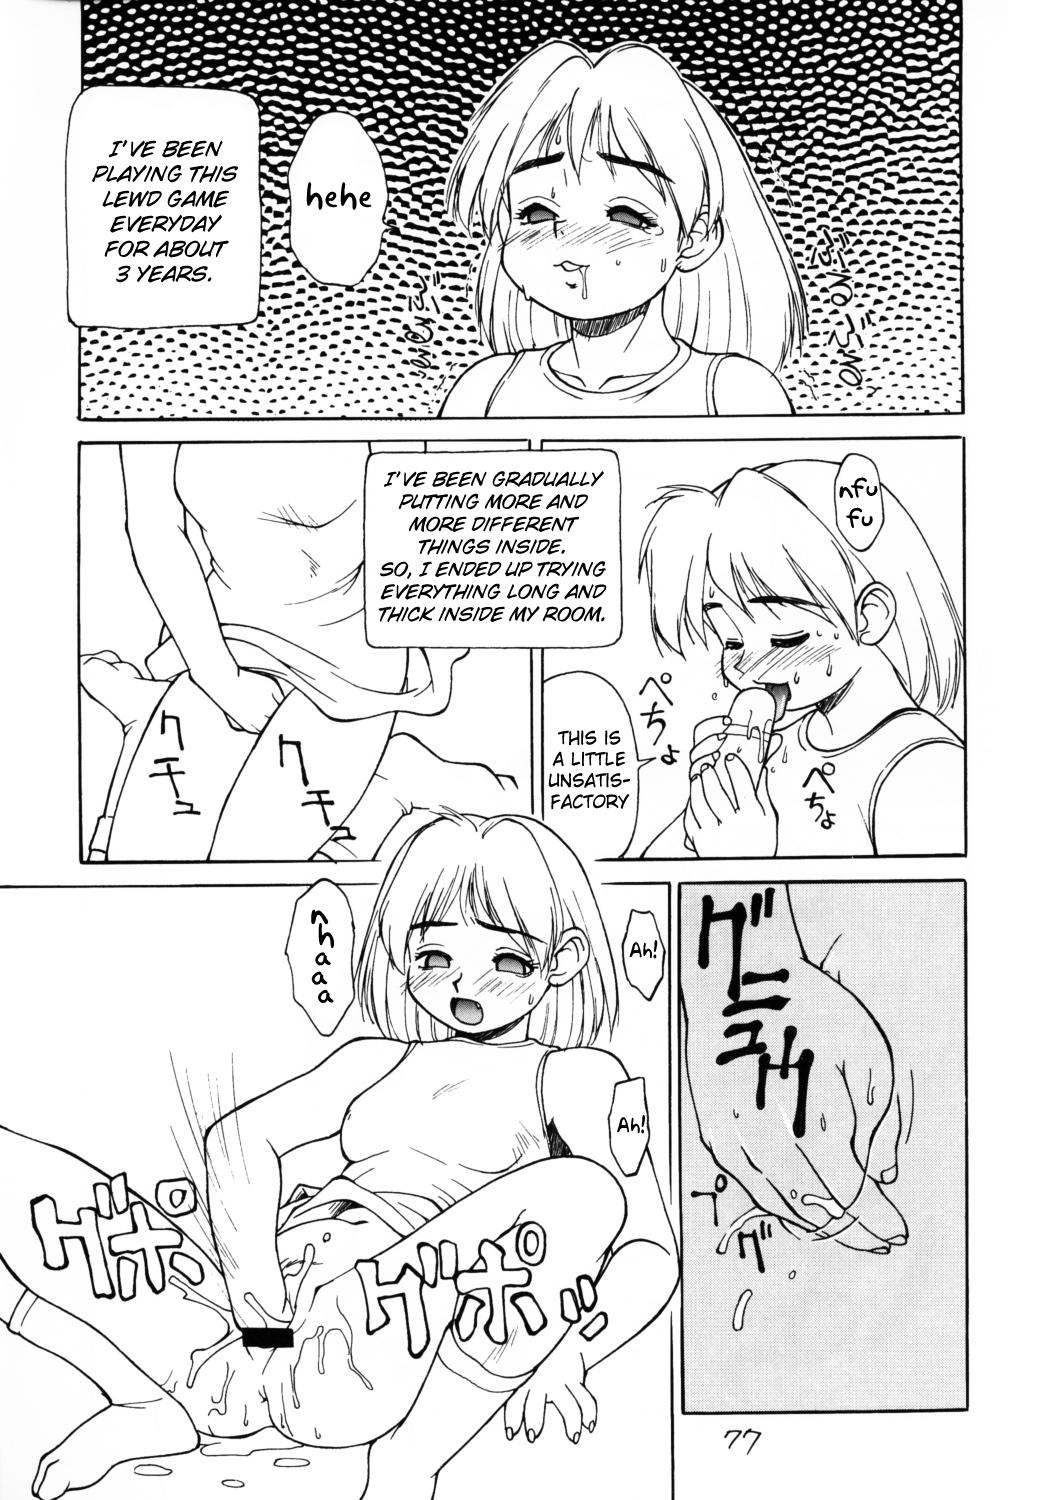 Mask Ayame-chan's forbidden acts Ballbusting - Page 3